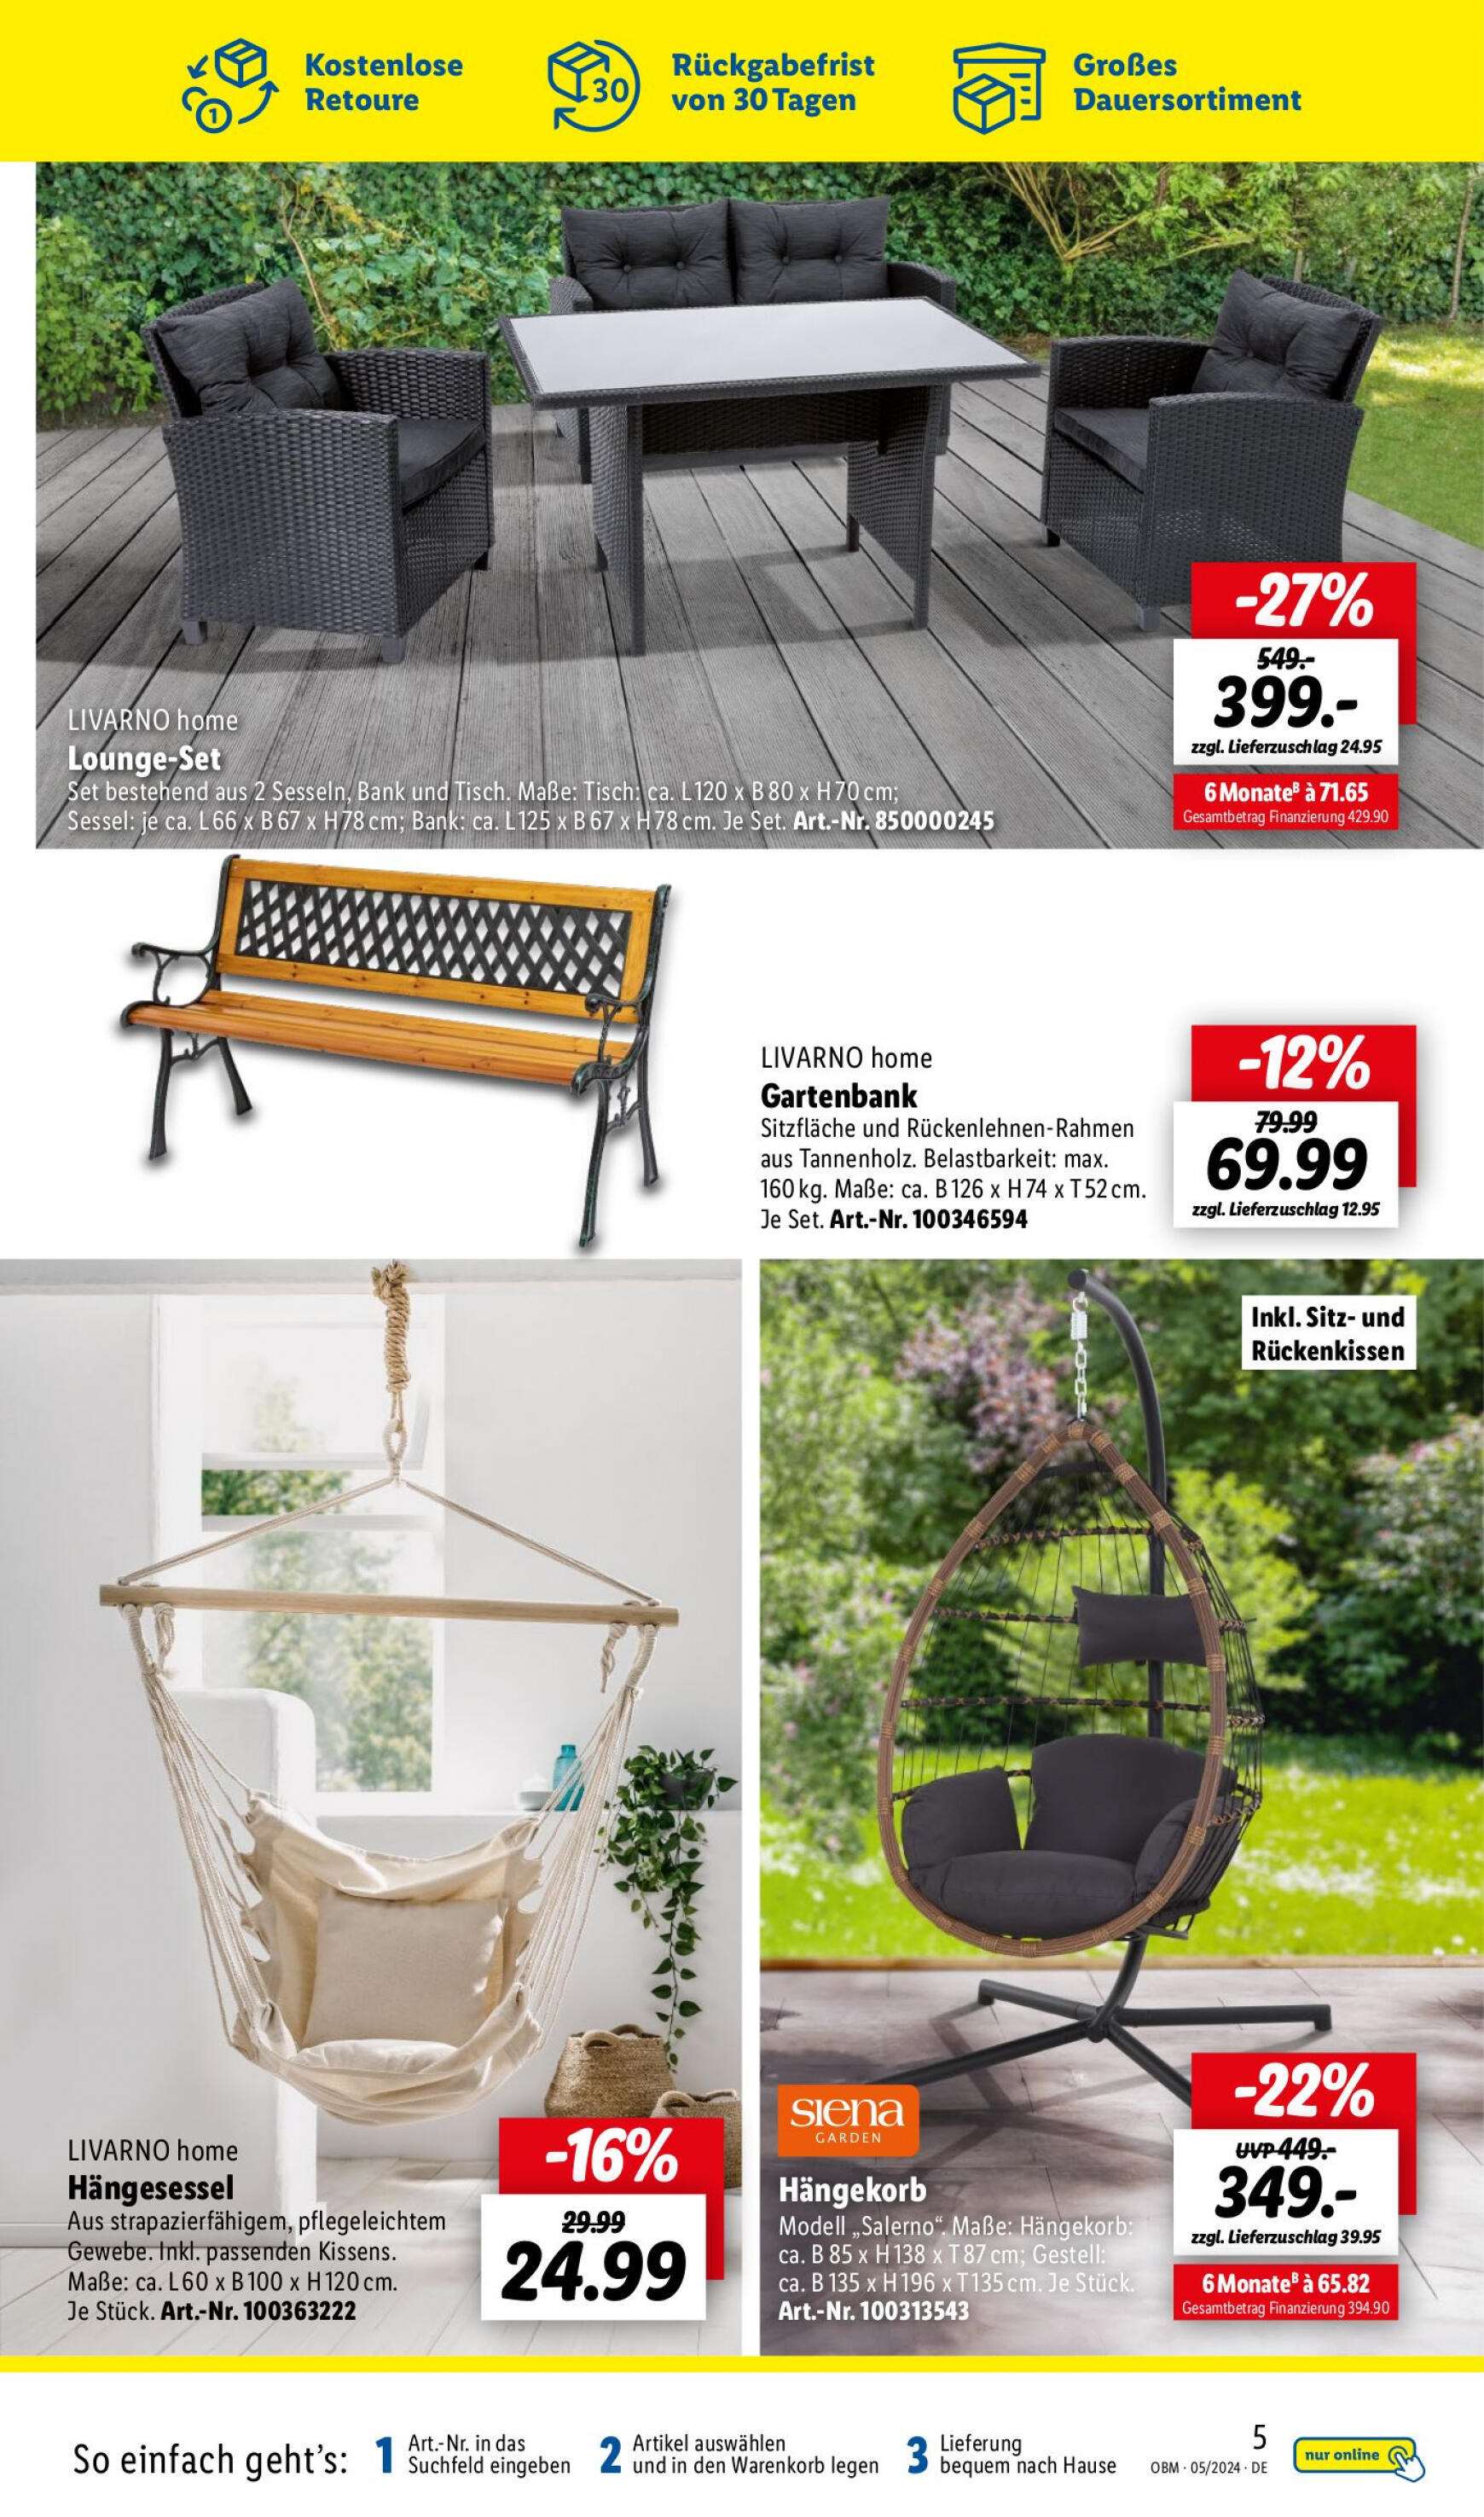 lidl - Flyer Lidl - Aktuelle Onlineshop-Highlights aktuell 01.05. - 31.05. - page: 5